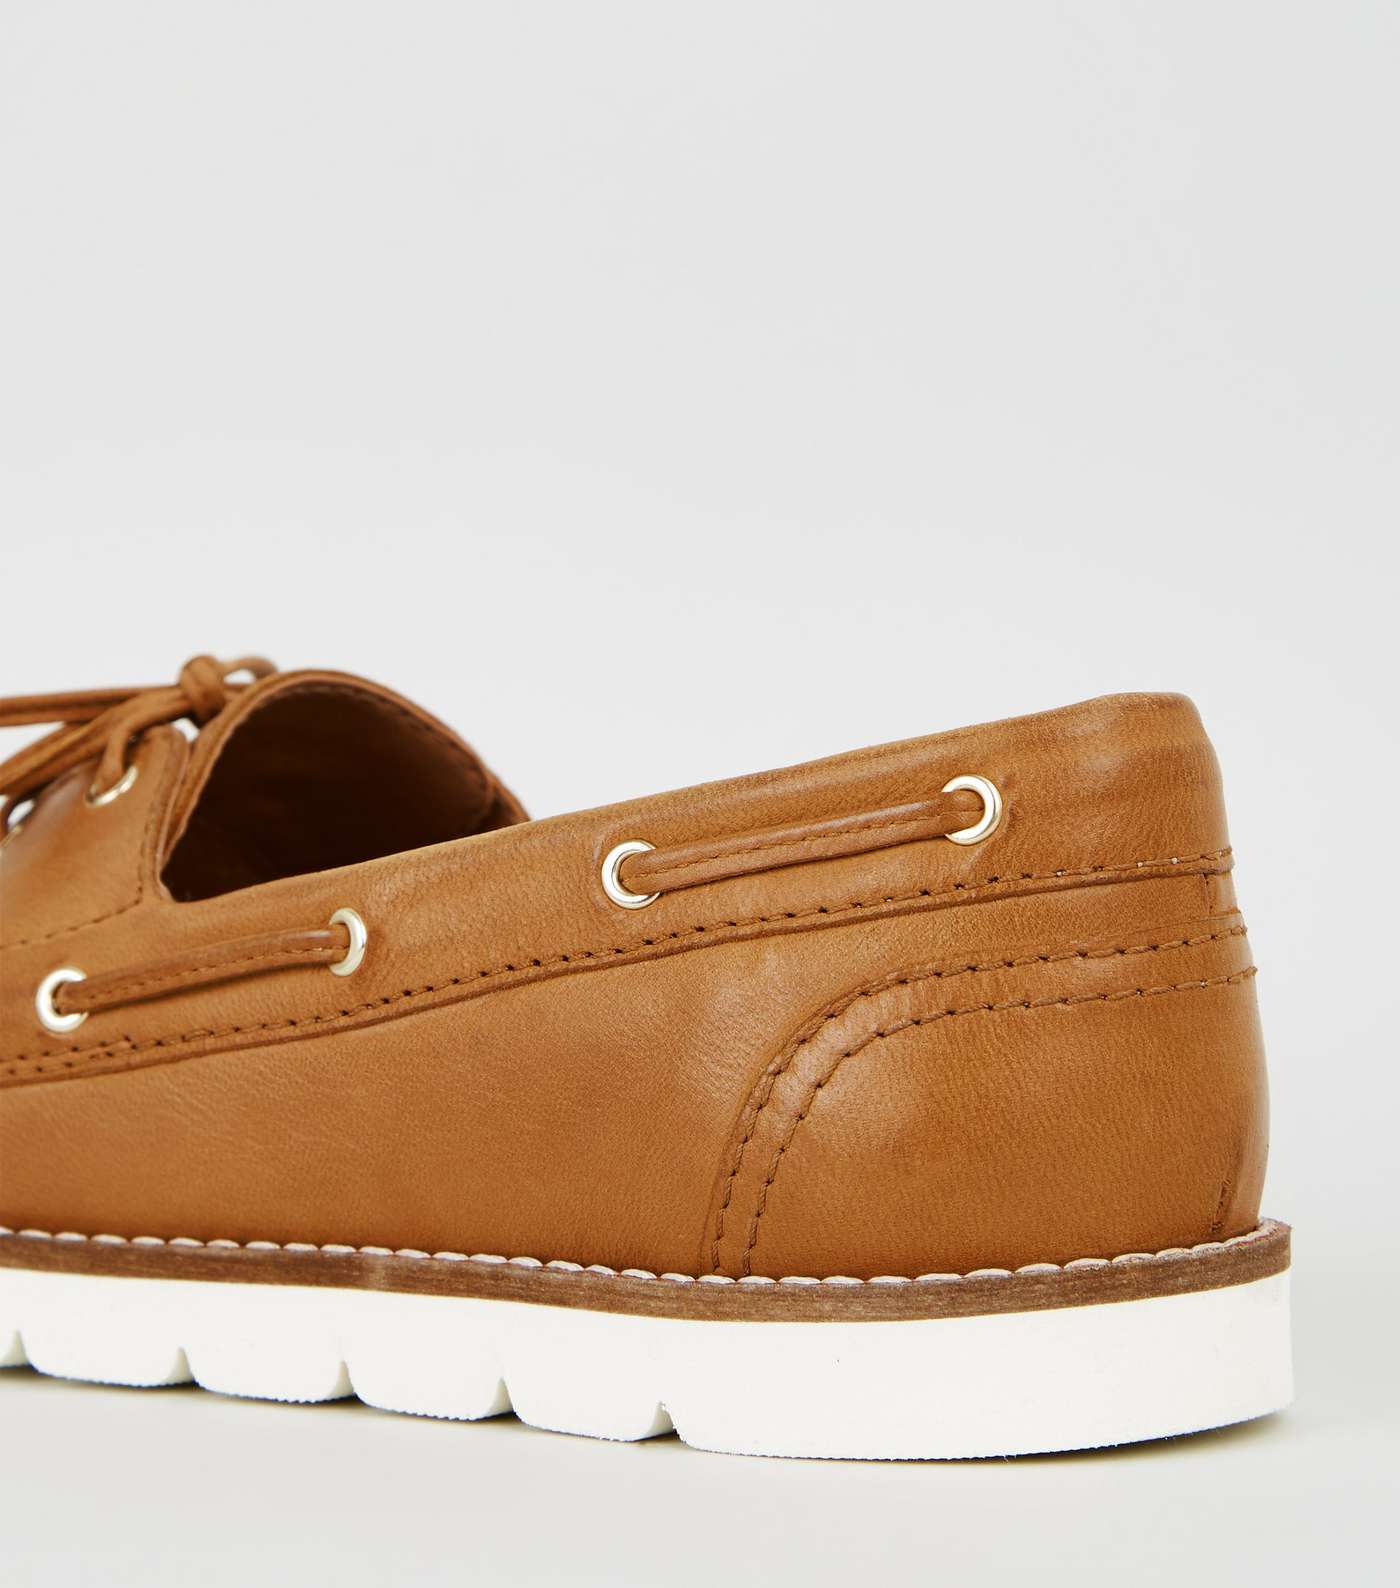 Tan Leather Boat Shoes Image 4